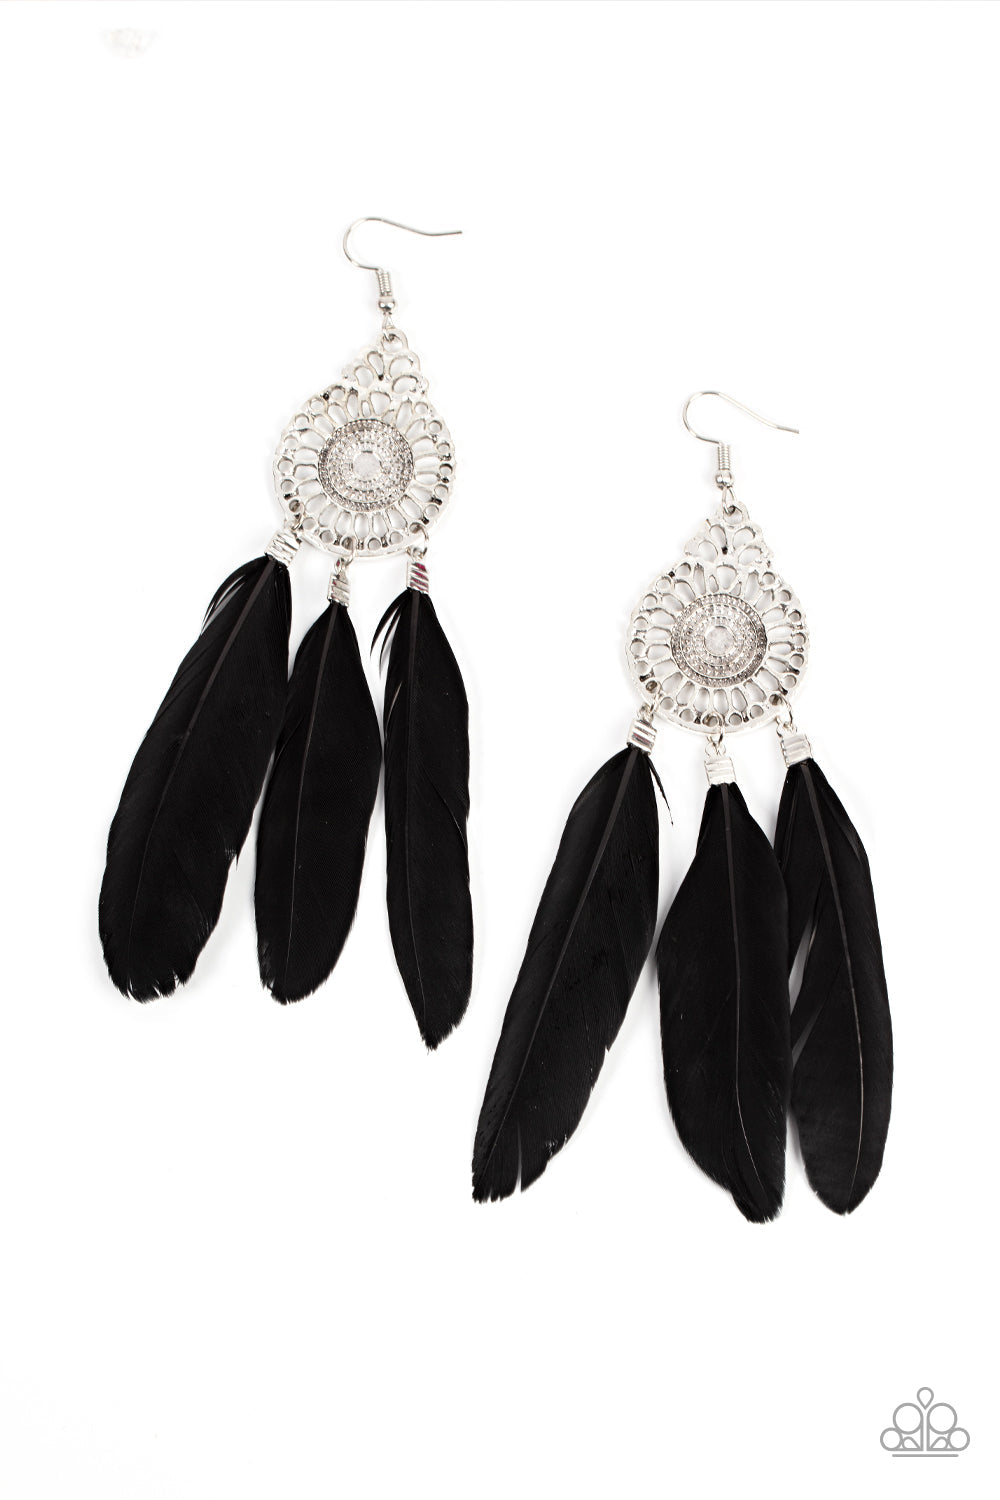 Pretty in PLUMES - Black Feather - Silver Fashion Earrings - Paparazzi Accessories - Three black feathers swing from the bottom of a dizzying silver frame featuring airy filigree detail, resulting in a flirtatiously colorful fringe. Earring attaches to a standard fishhook fitting.